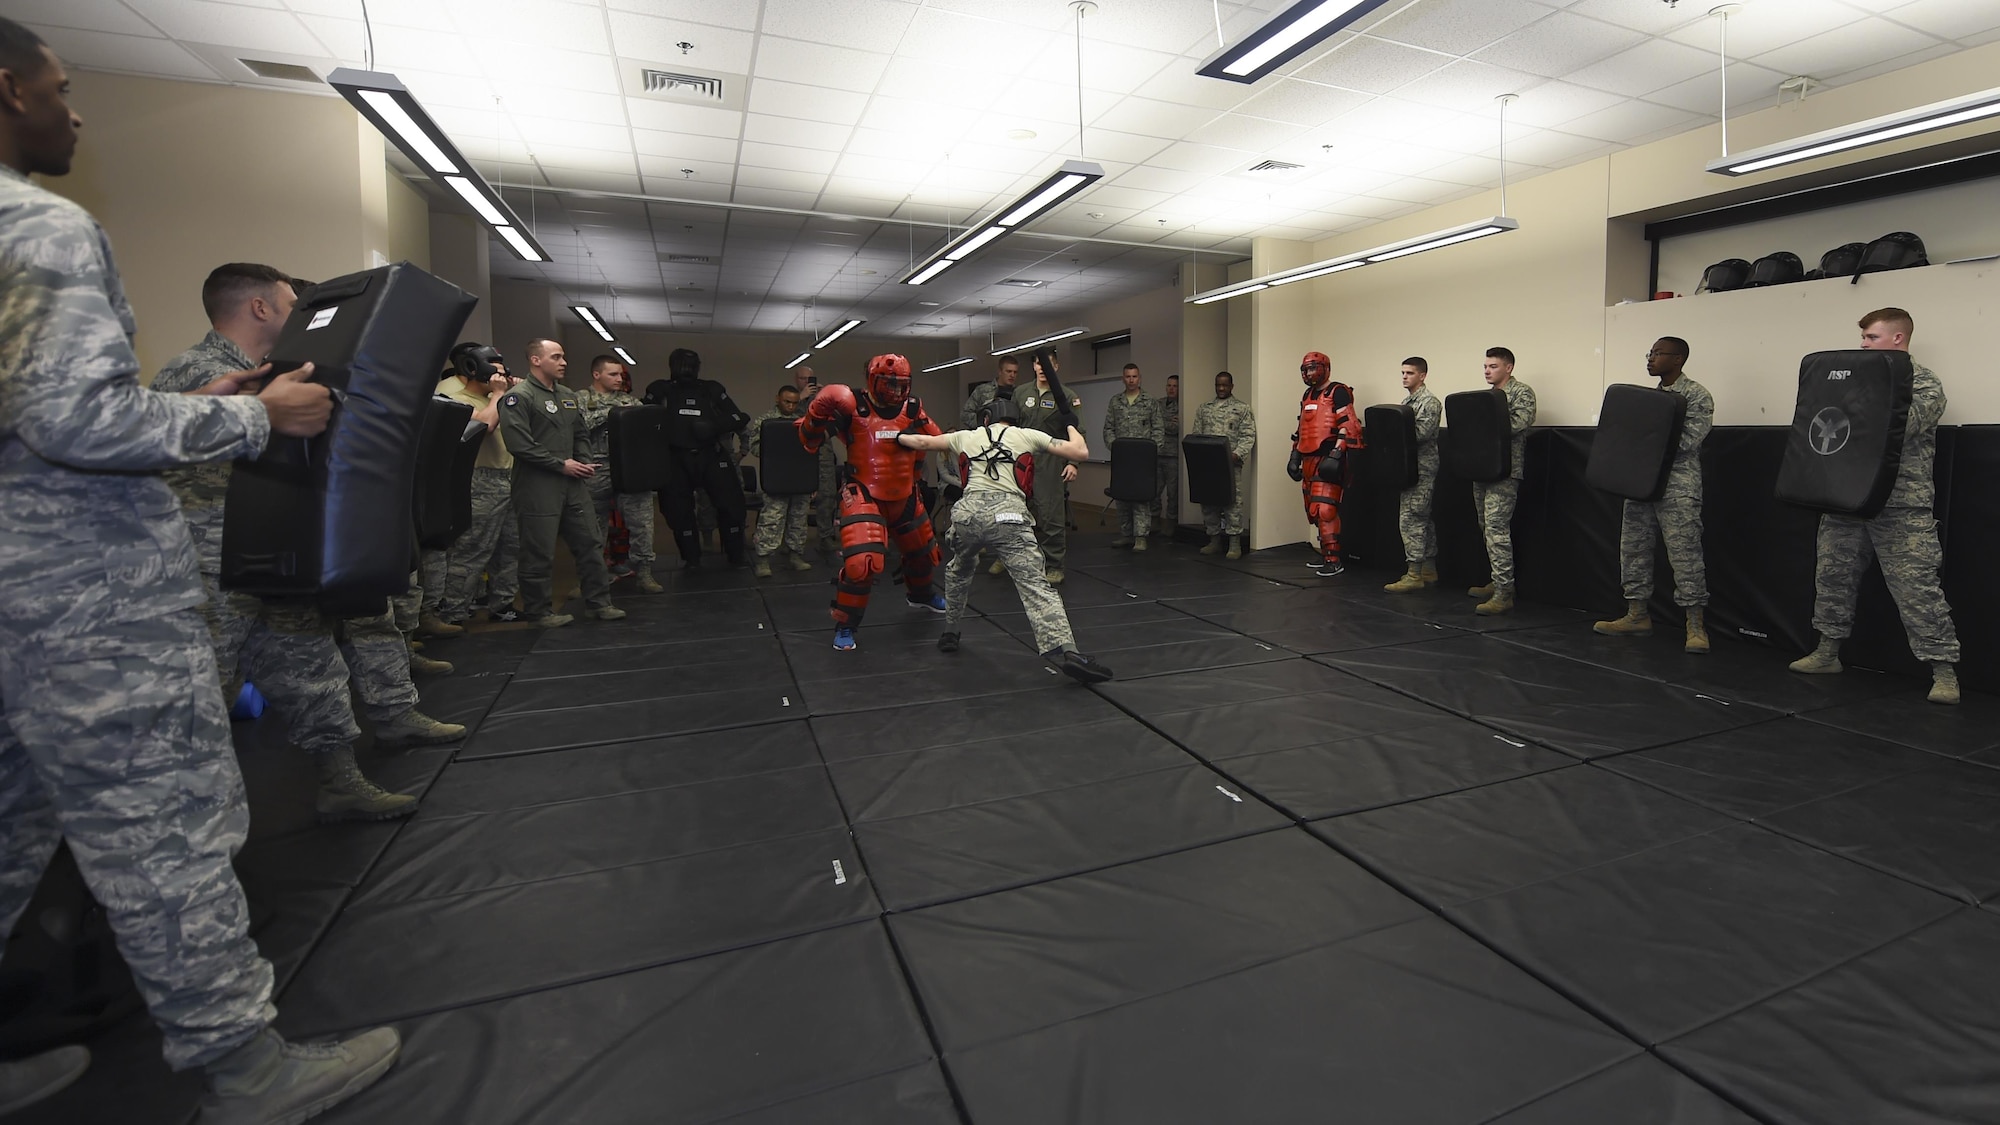 U.S. Air Force Airmen from the 19th Security Forces Squadron form a barrier around Airman 1st Class Timothy Bukovich, 19th SFS patrolman, during close combat training, Feb. 17, 2017, at Little Rock Air Force Base, Ark. The “Red Man” exercise was the capstone event of a weeklong course of Phoenix Raven instruction for Airmen attempting to join the little-known team of elite security commandos. (U.S. Air Force photo/Senior Airman Harry Brexel)